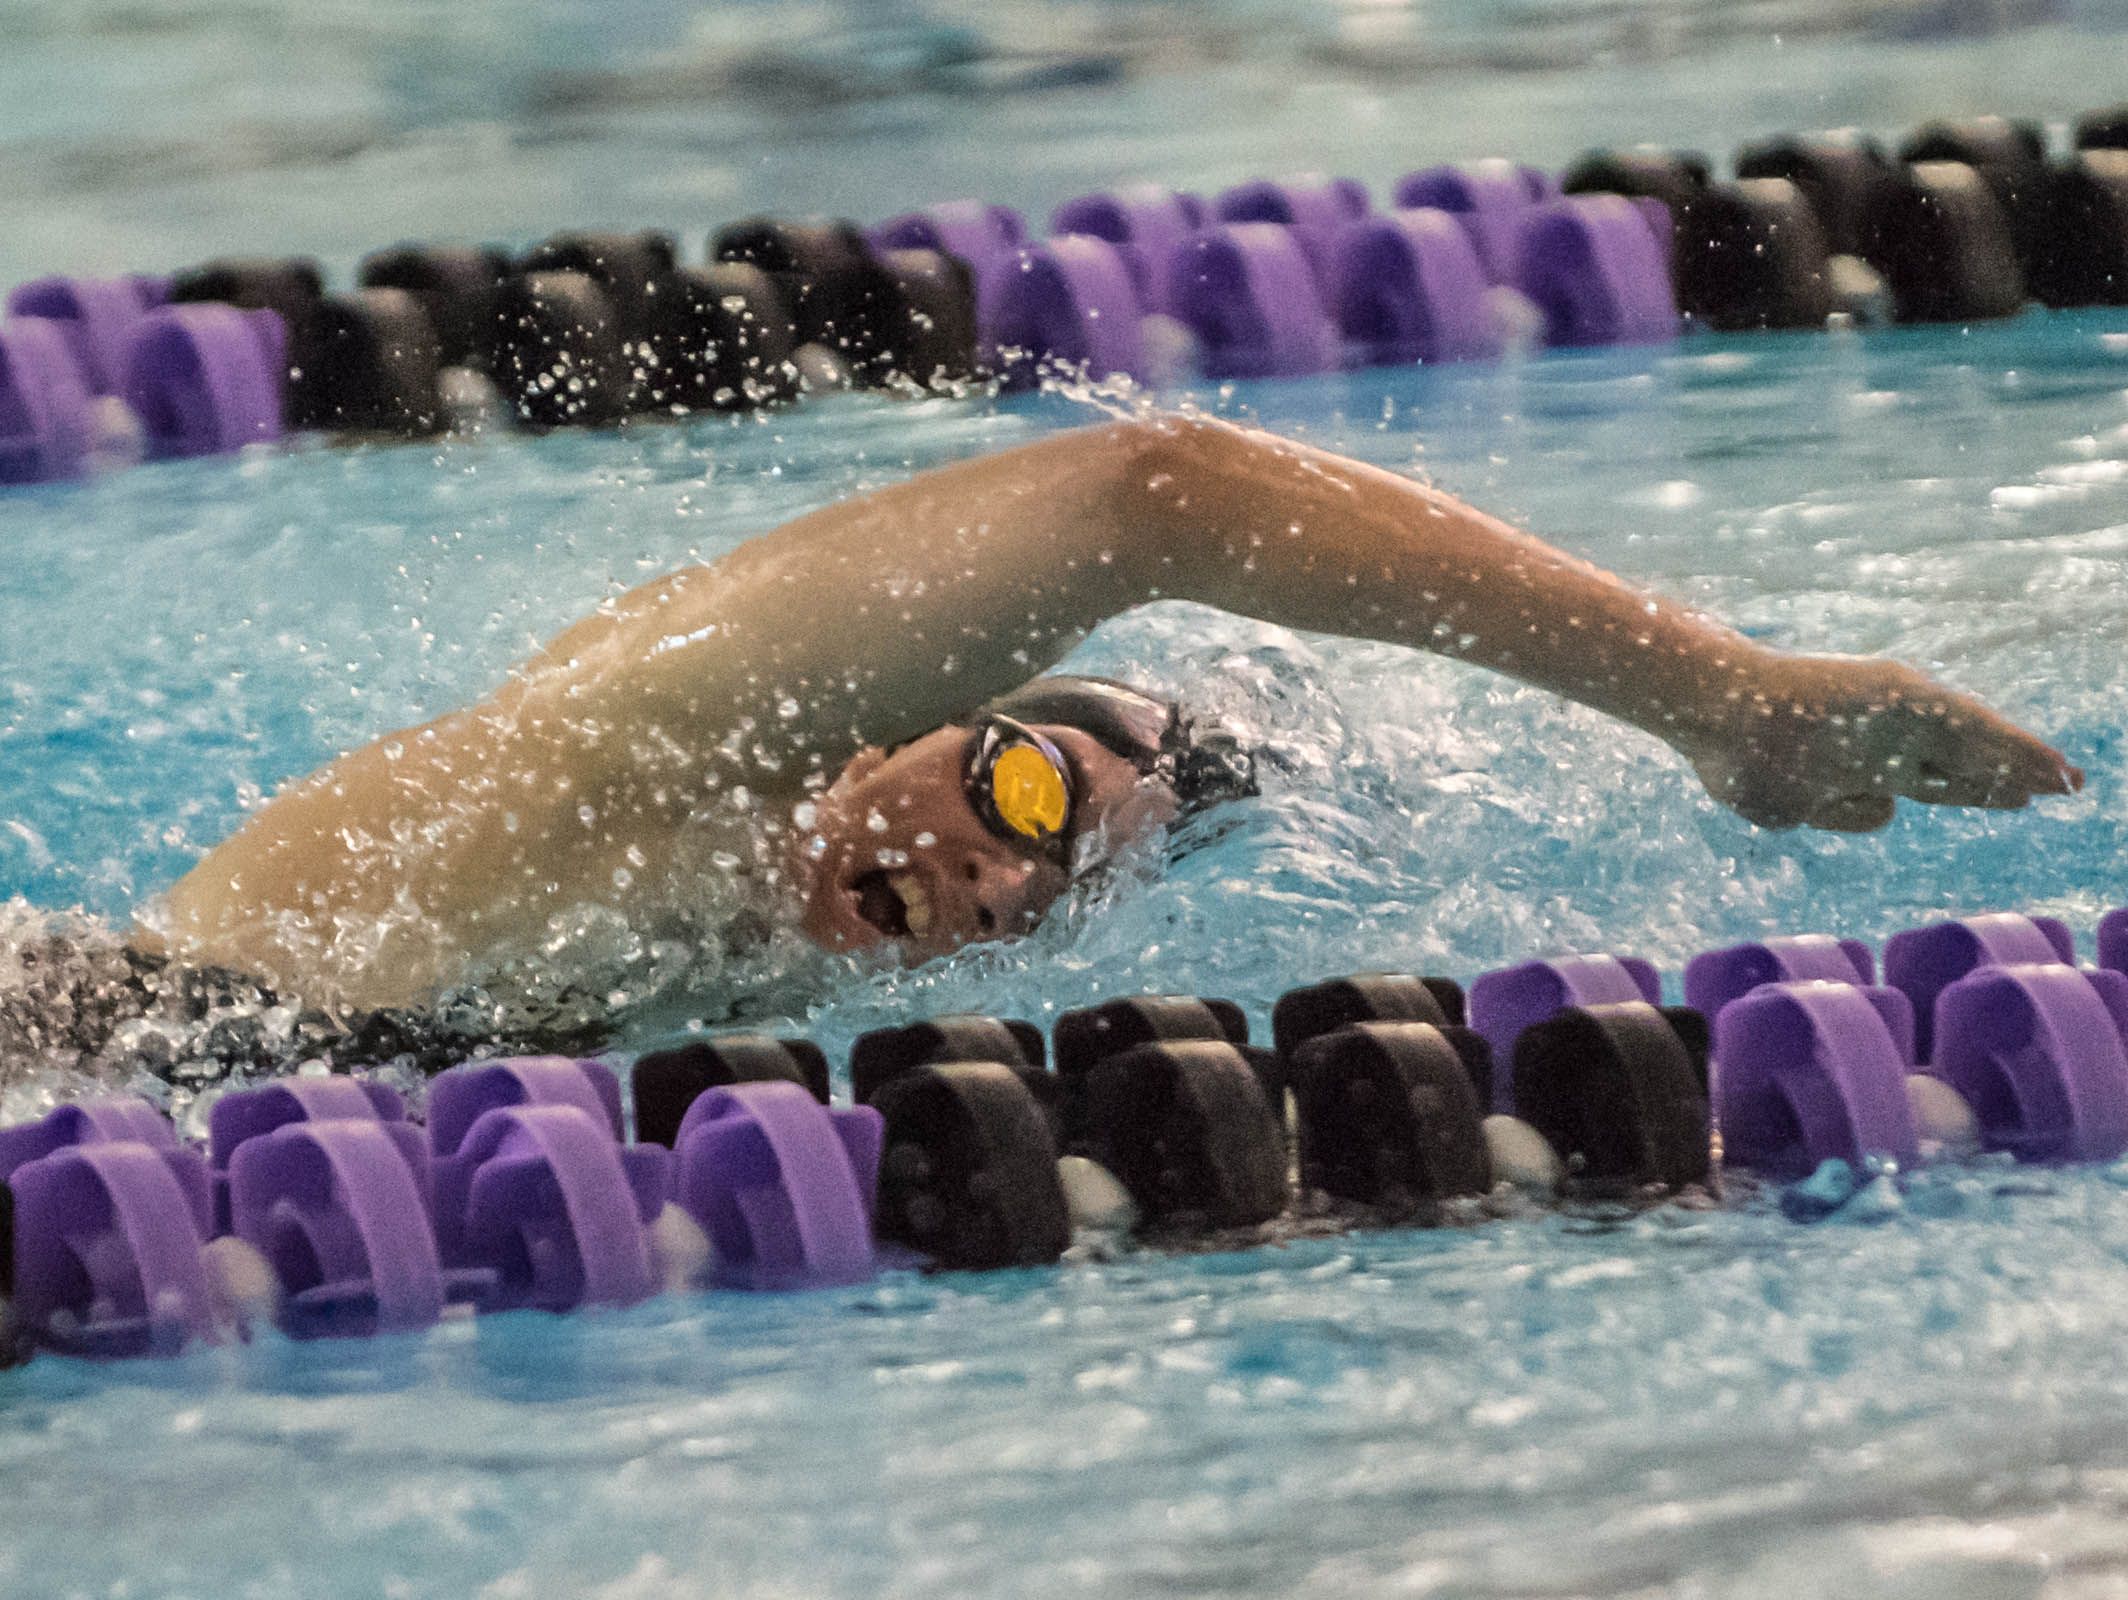 Lakeview's Allison Shenefield competes in the 100 Yard Freestyle during the 2016 All-City Swim Meet held at Lakeview on Saturday.